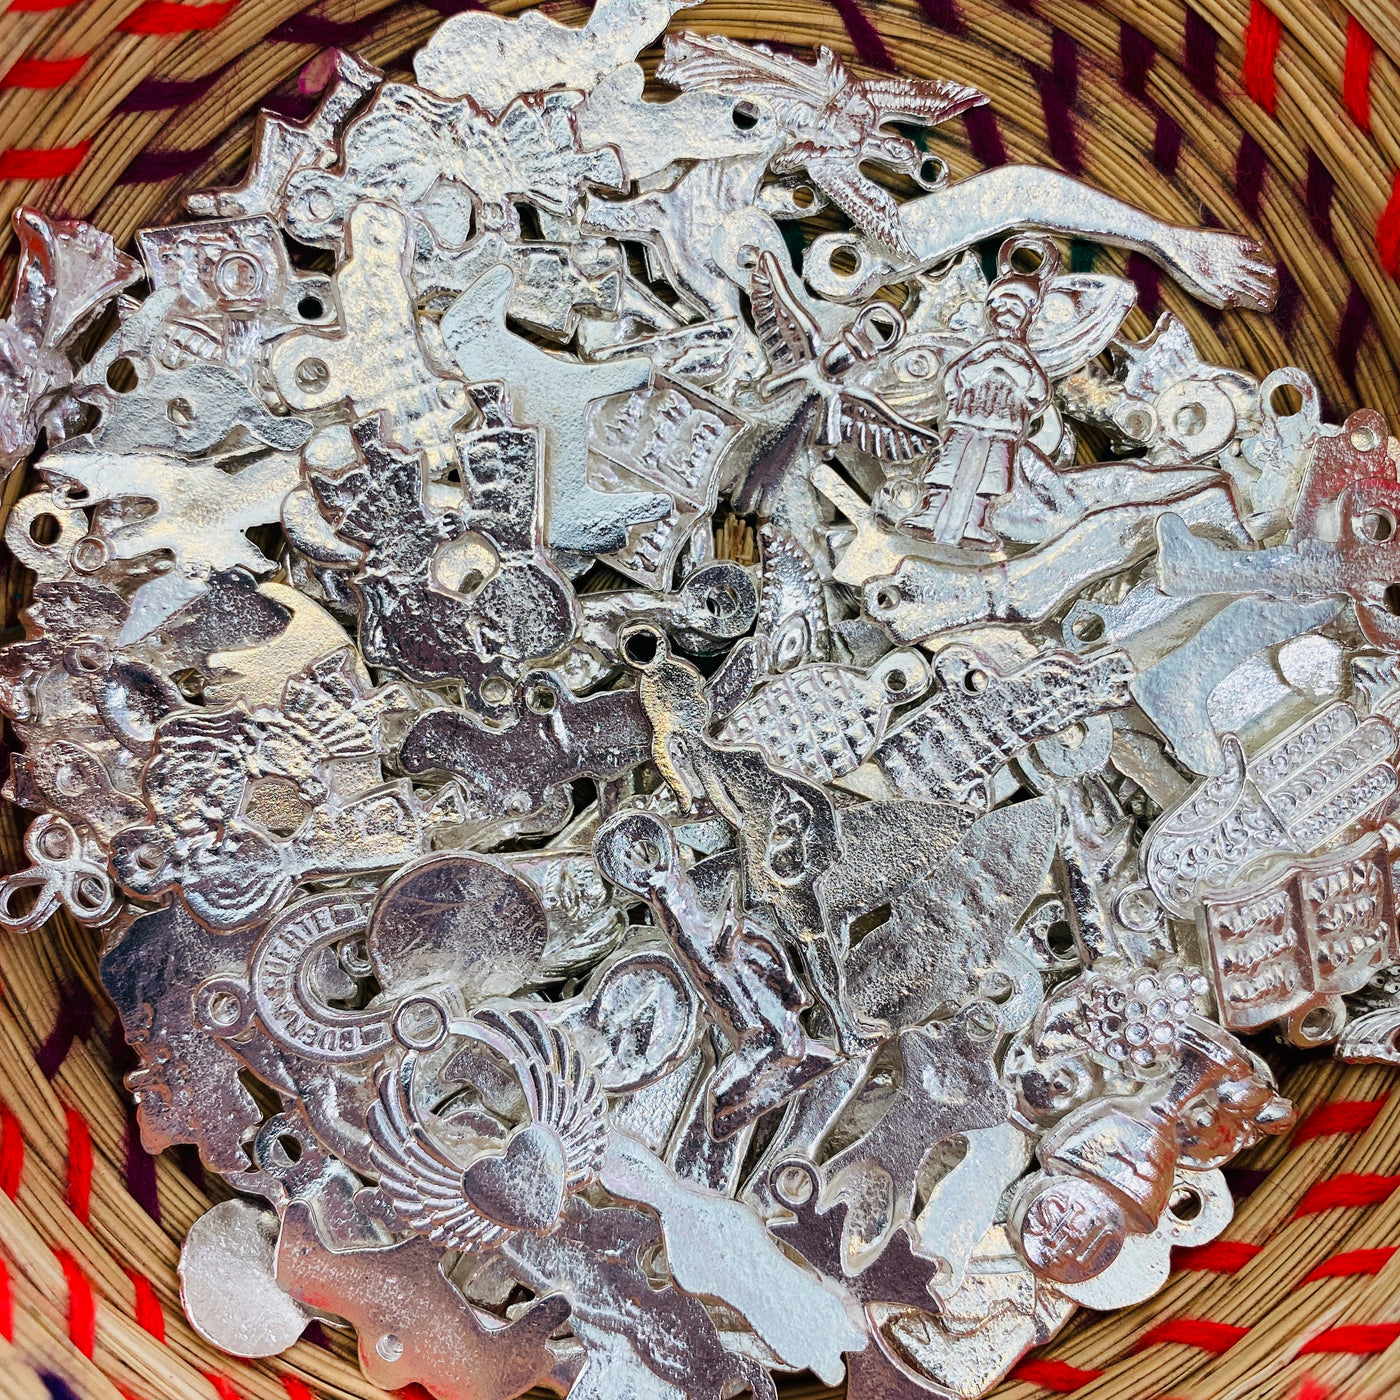 Close up of milagro (miracle) charms in basket.